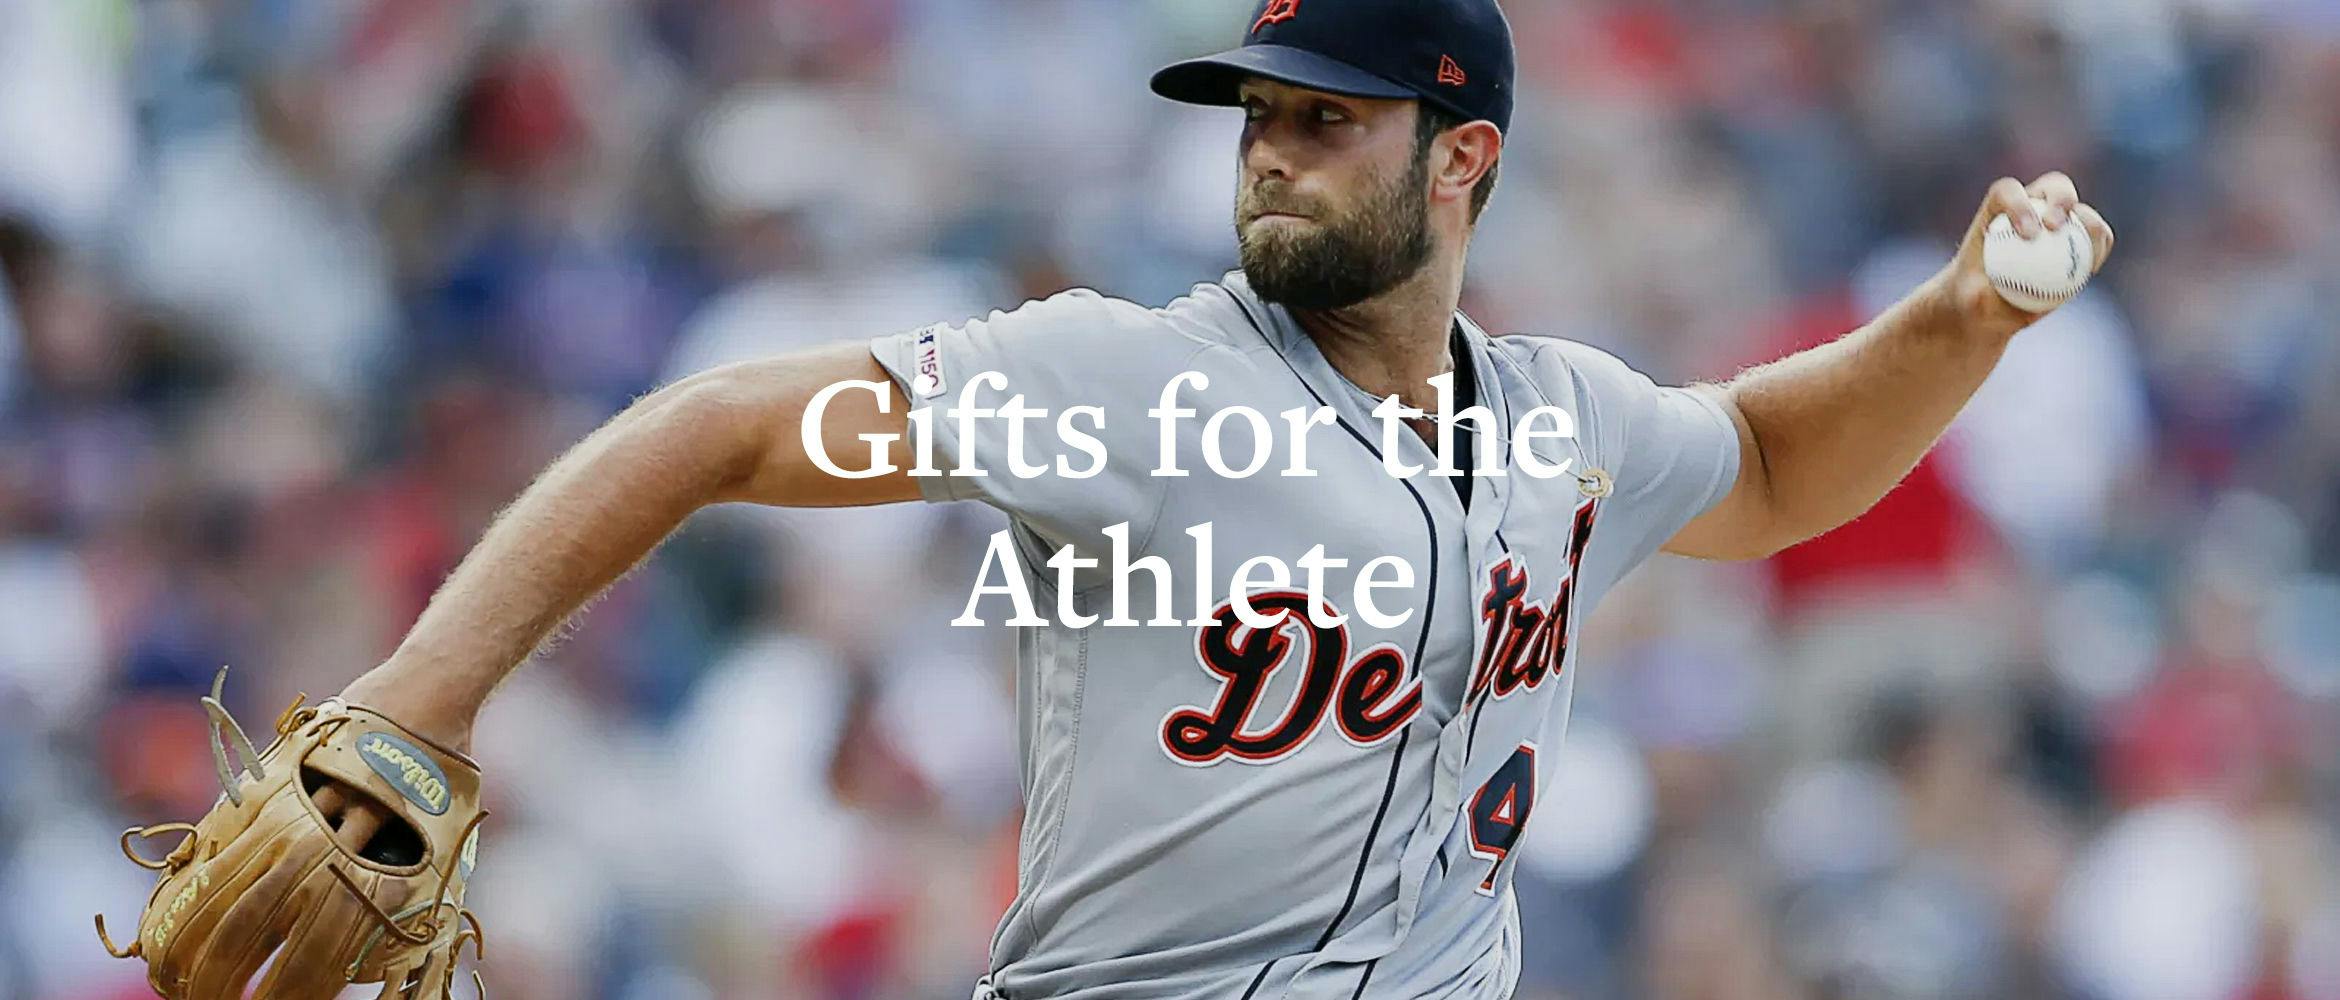 Gifts for the Athlete: Daniel Norris